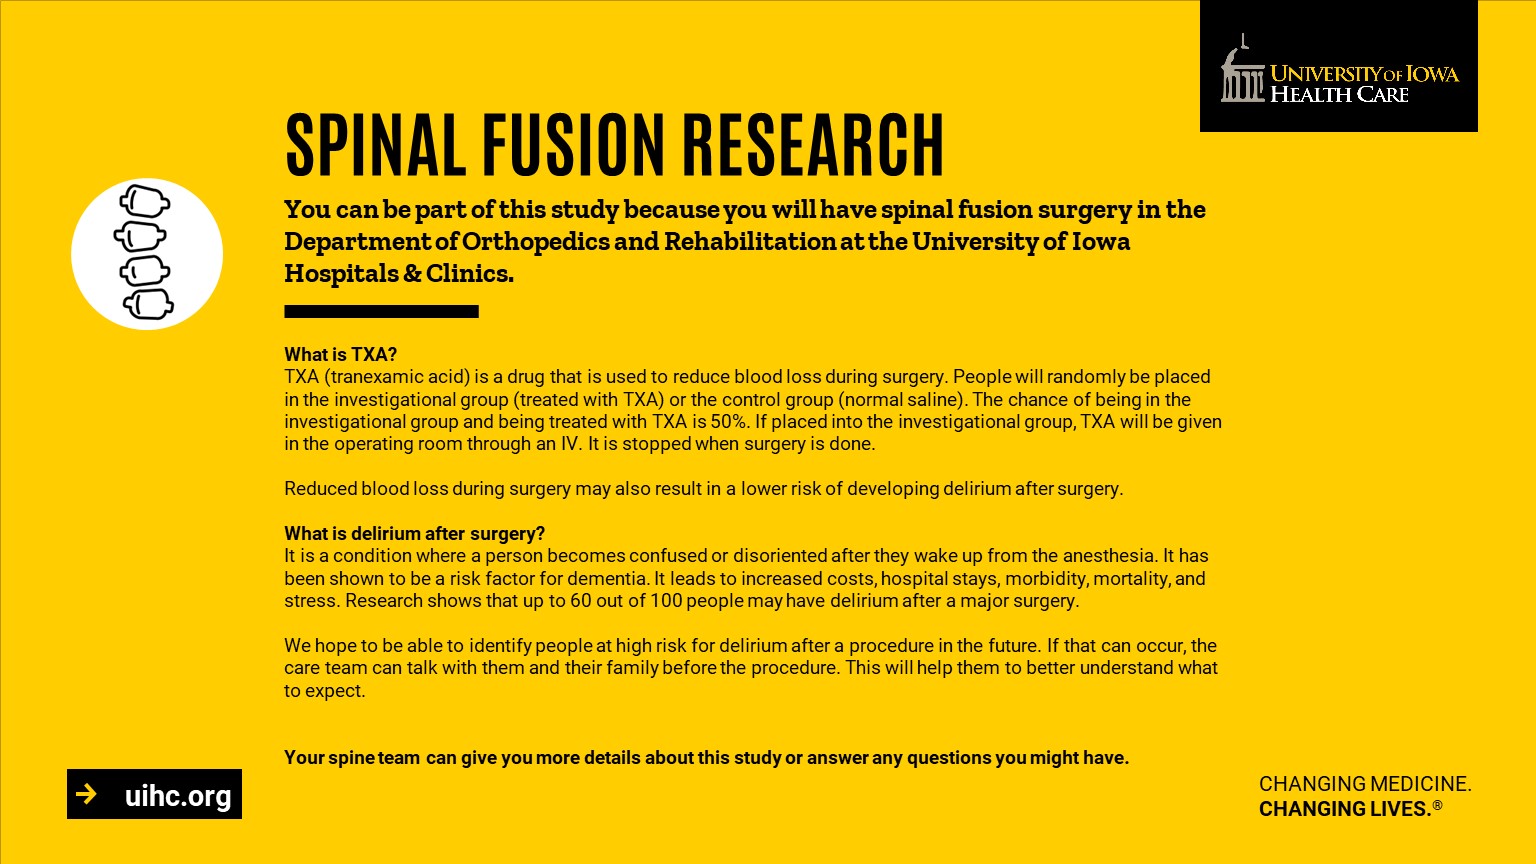 Spinal Fusion research